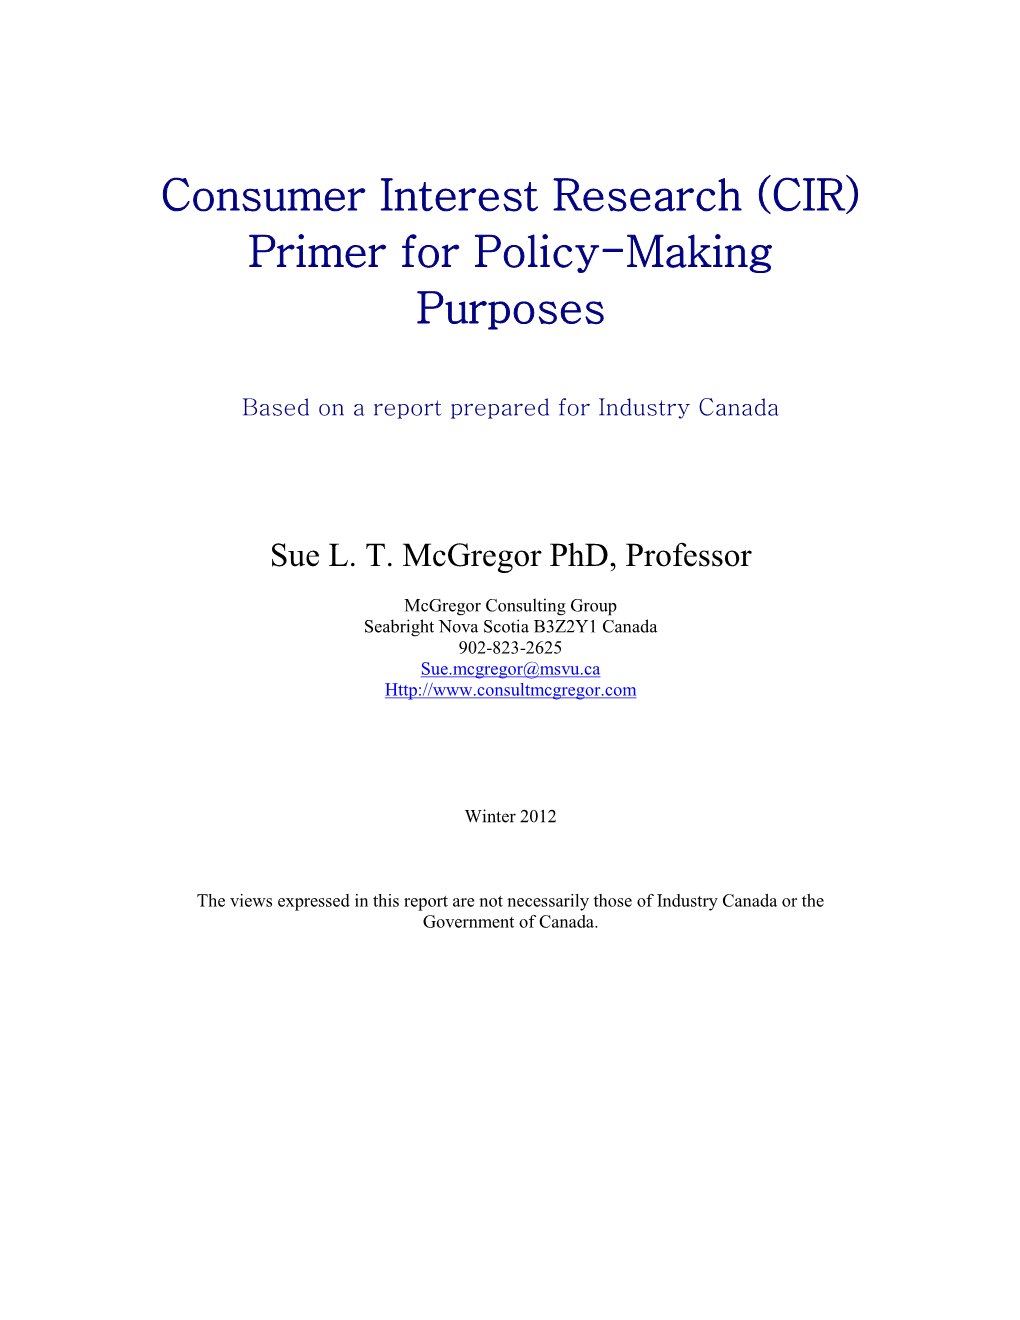 Consumer Interest Research (CIR) Primer for Policy-Making Purposes